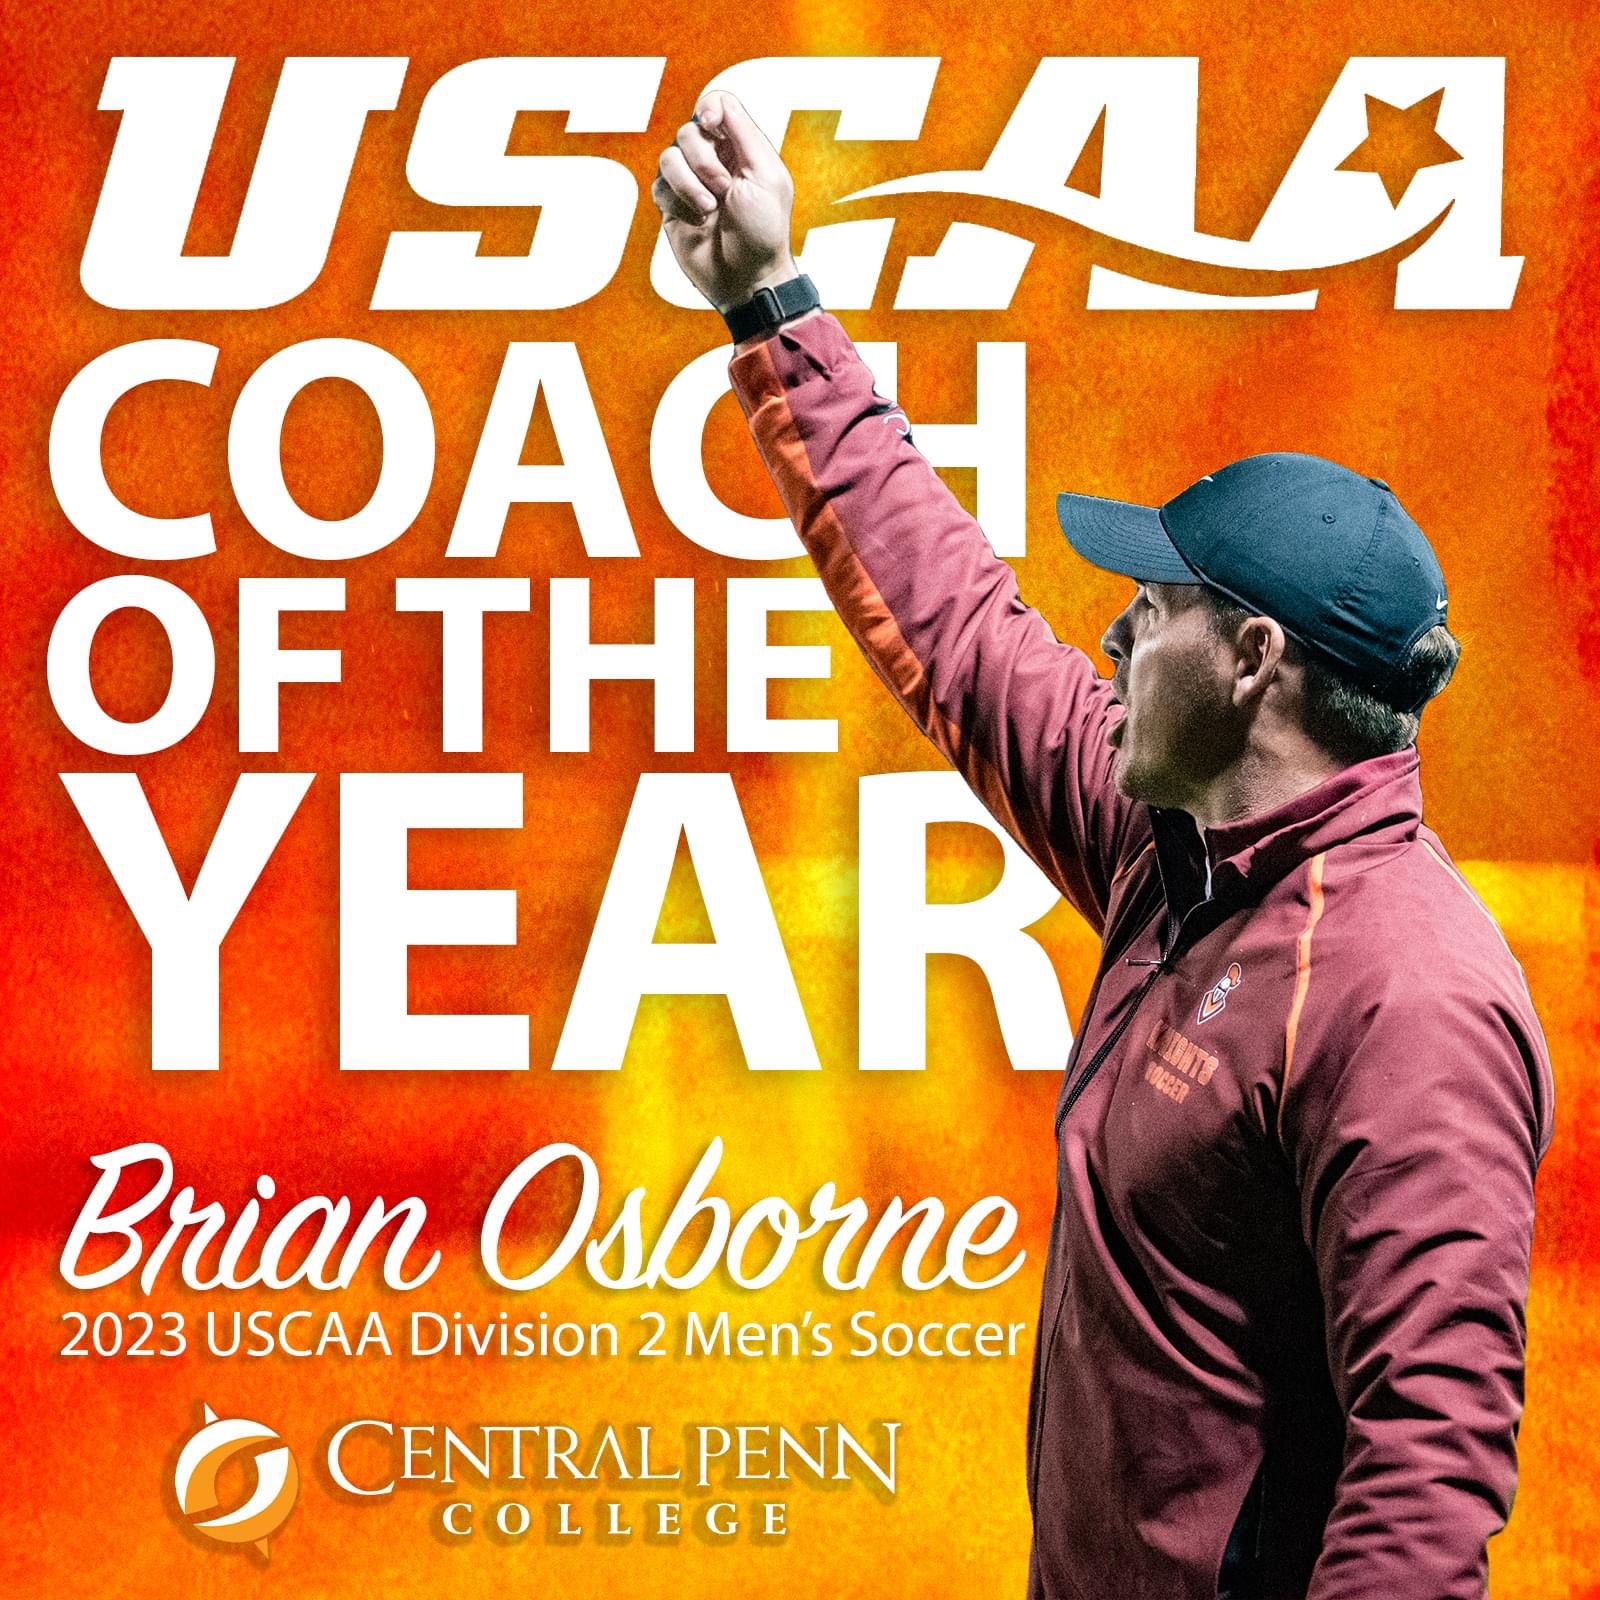 Central Penn College&rsquo;s Brian Osborne Named &ldquo;Coach of the Year&rdquo;